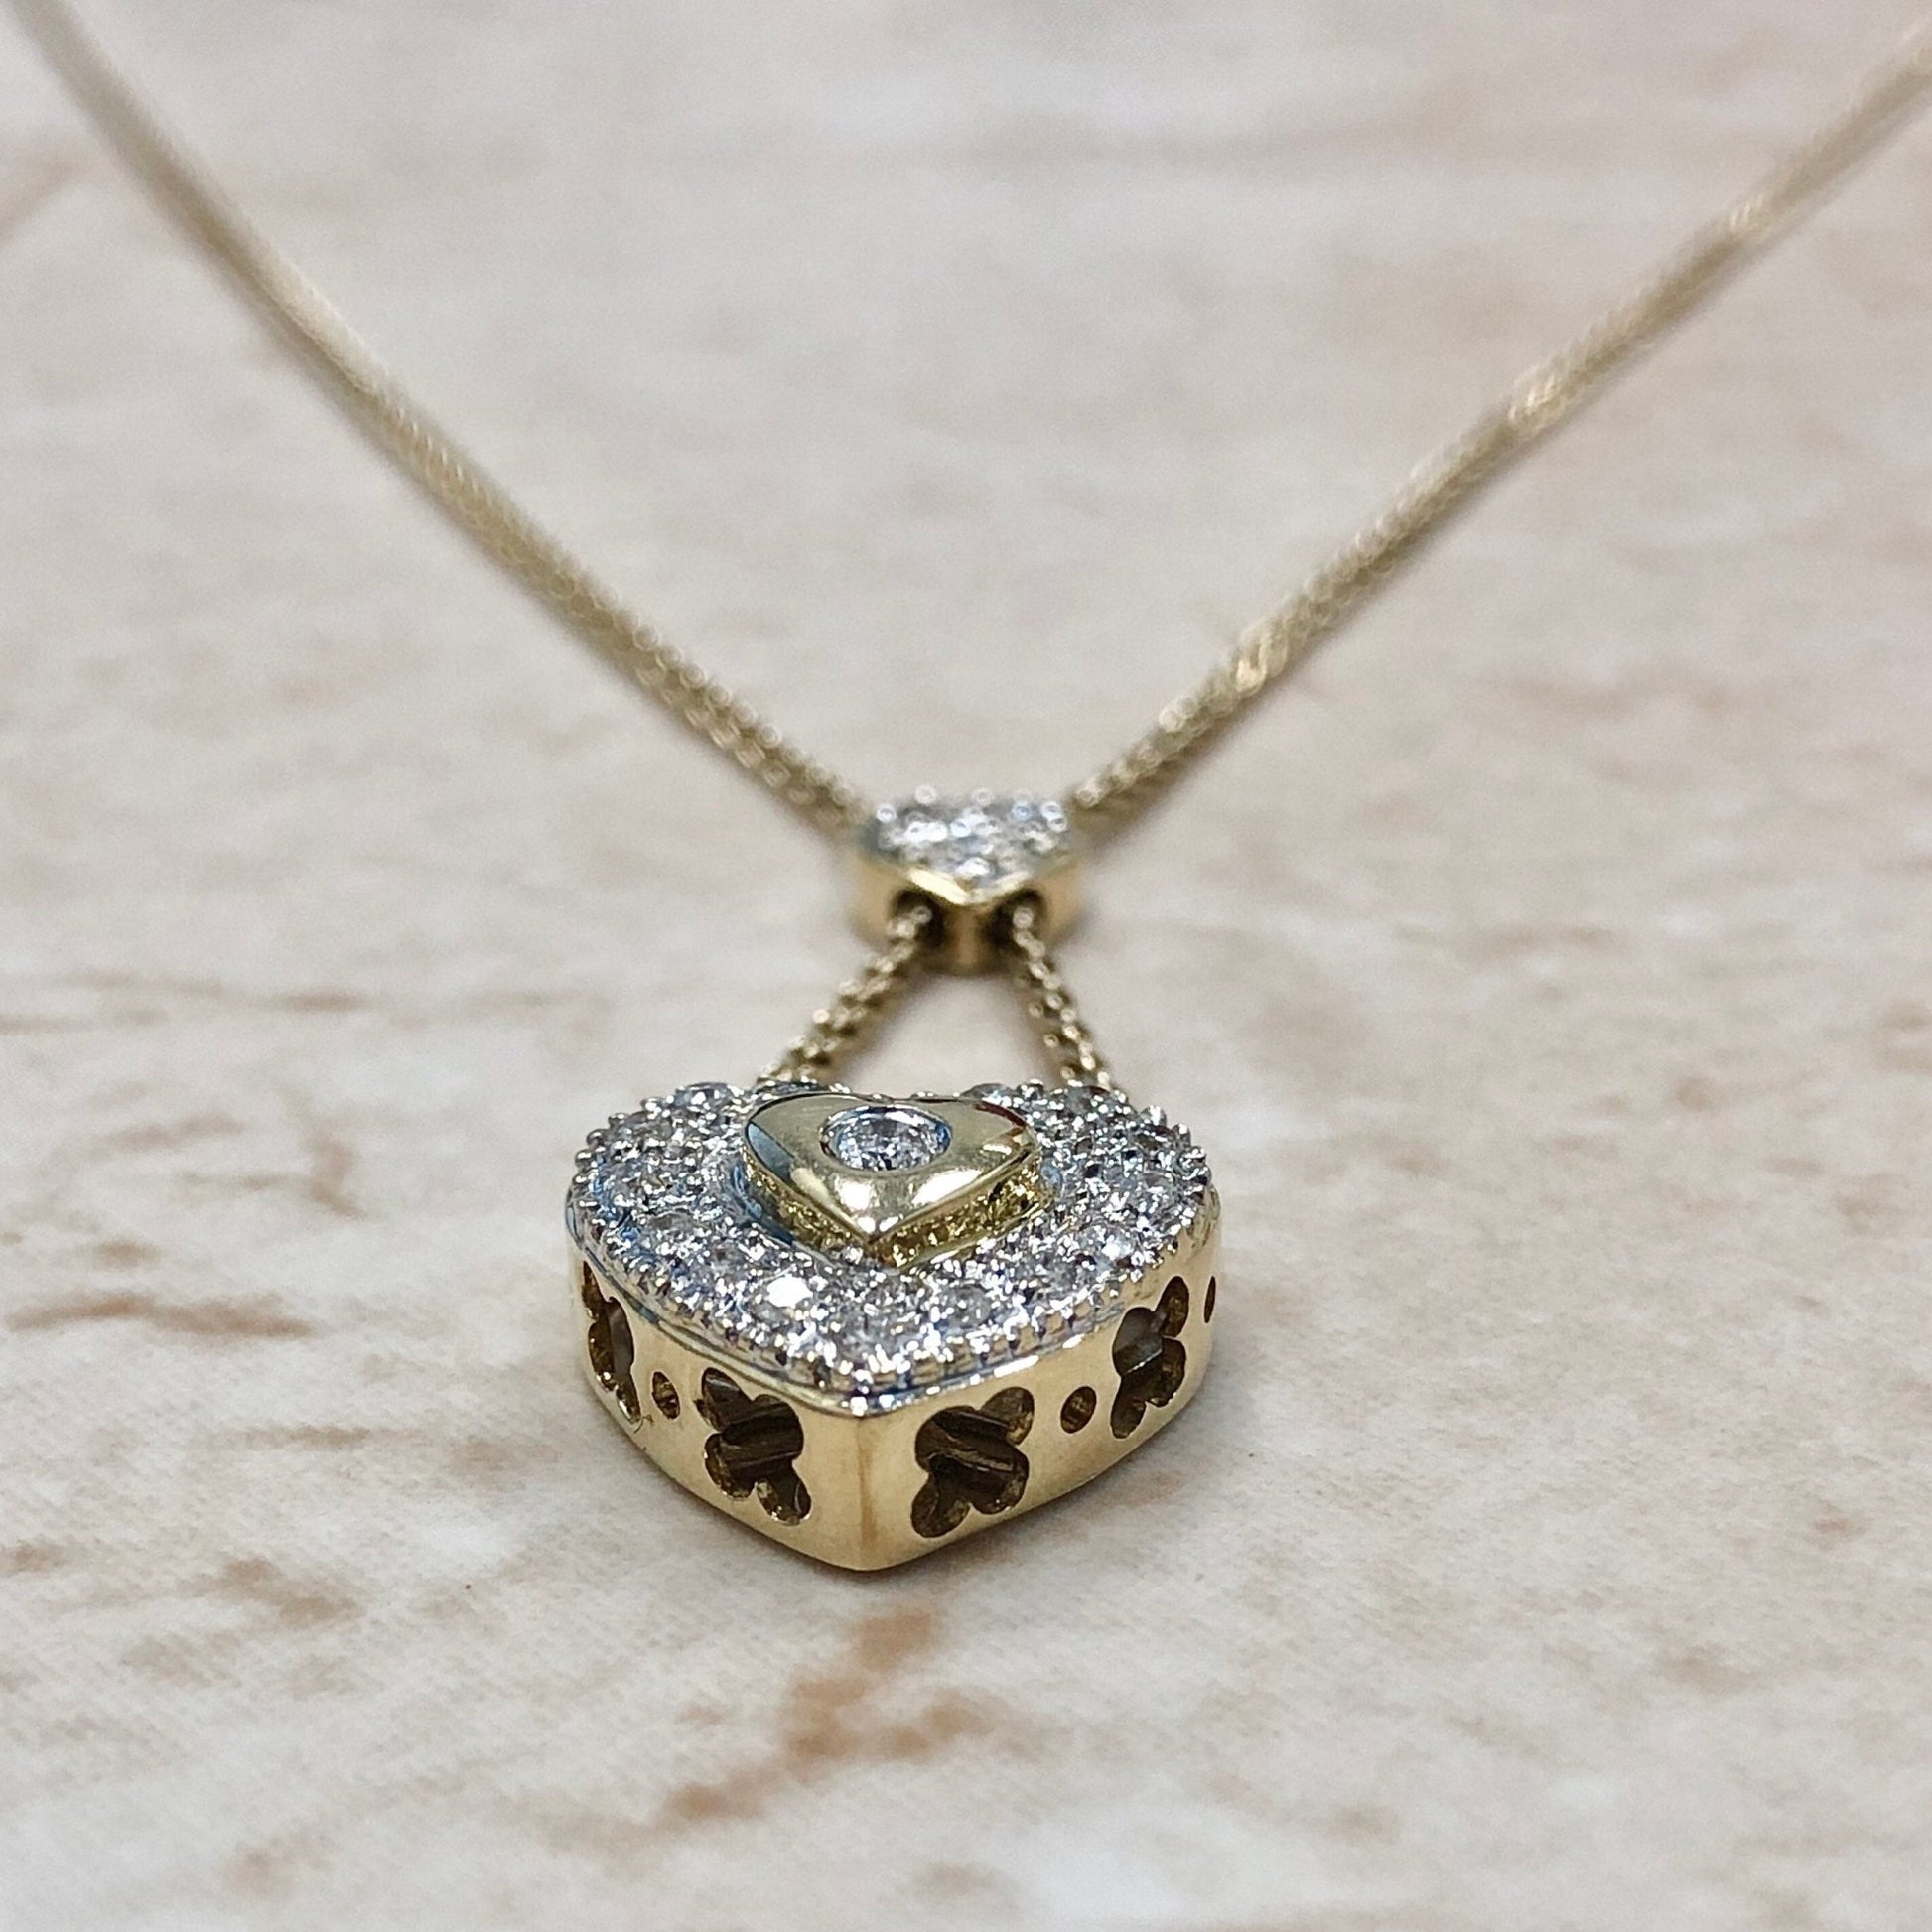 14K Diamond Heart Pendant Necklace - Yellow Gold Diamond Pendant - Gold Heart Necklace - Birthday Gift - Valentine’s Day Gifts For Her